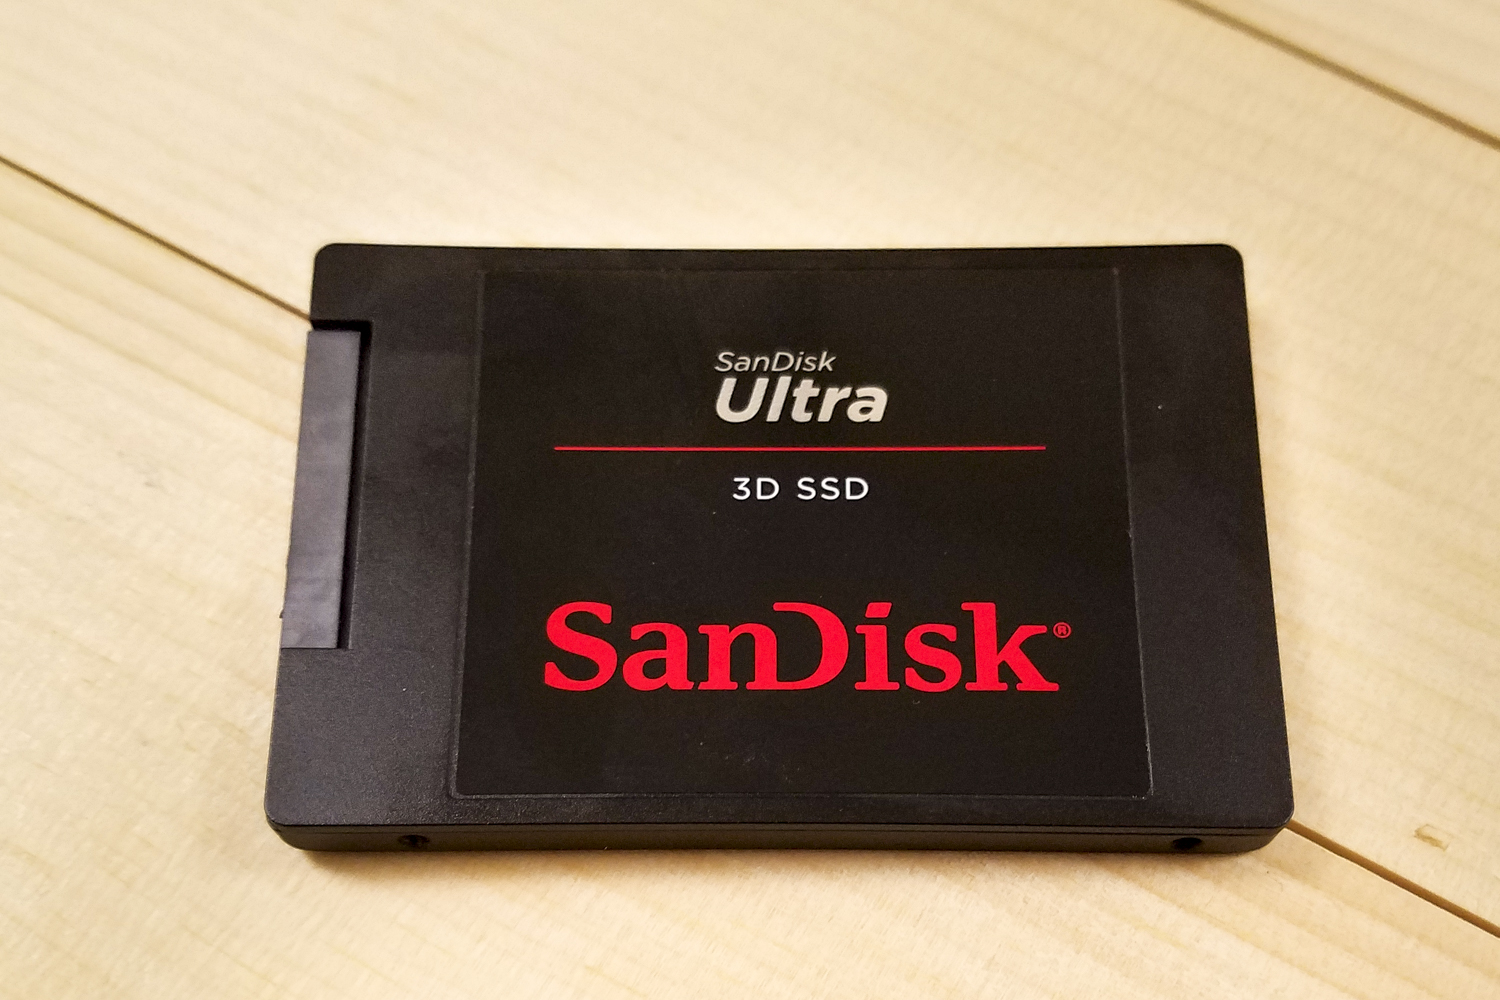 SanDisk Ultra 3D SSD sitting flat on a table